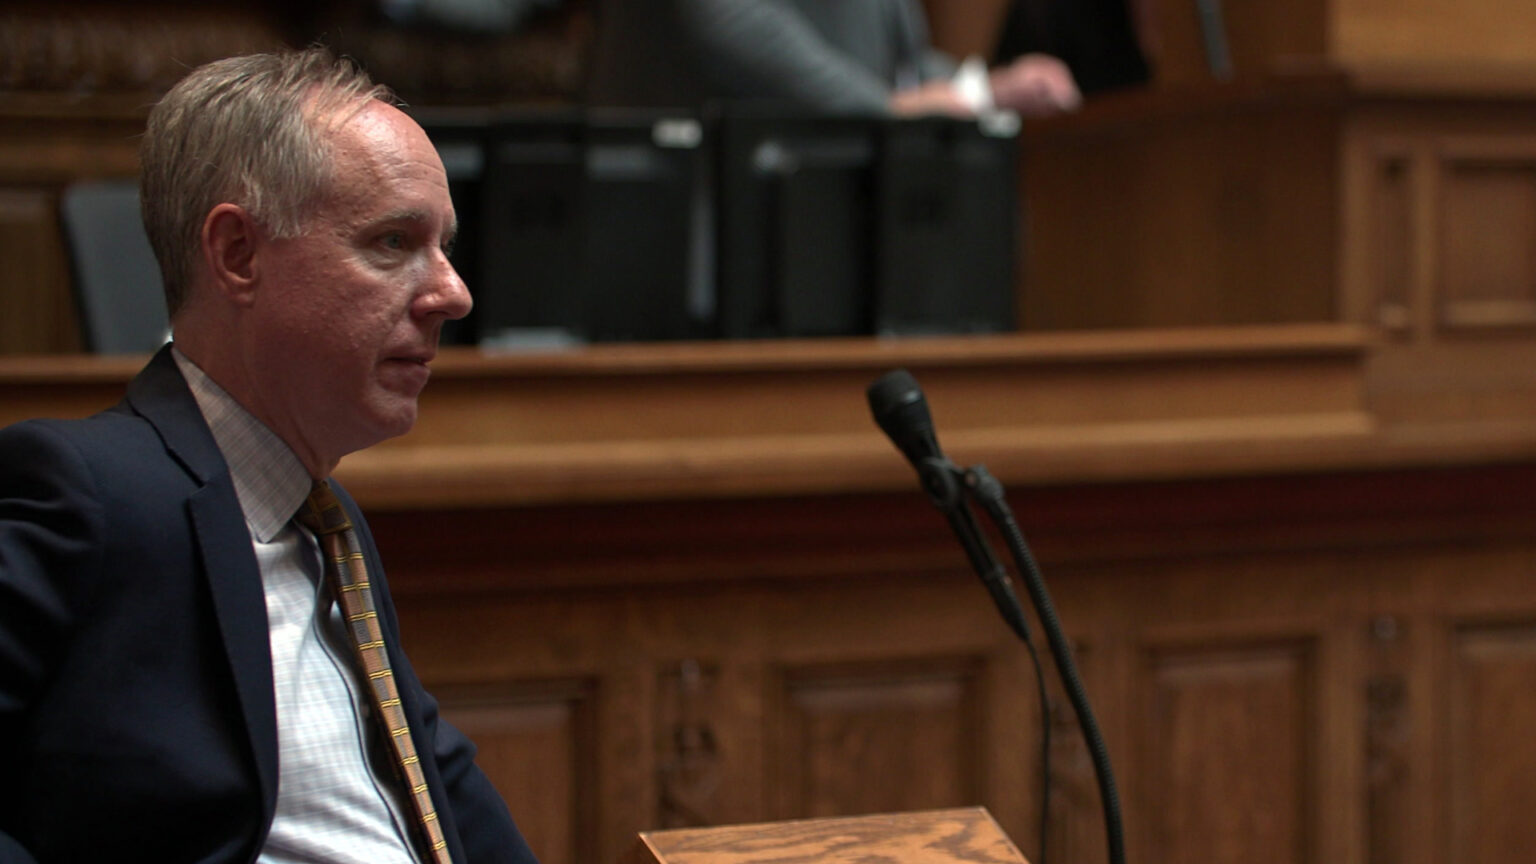 Robin Vos stands behind a wood podium with a microphone and listens, with other people standing at a legislative dais in the background.